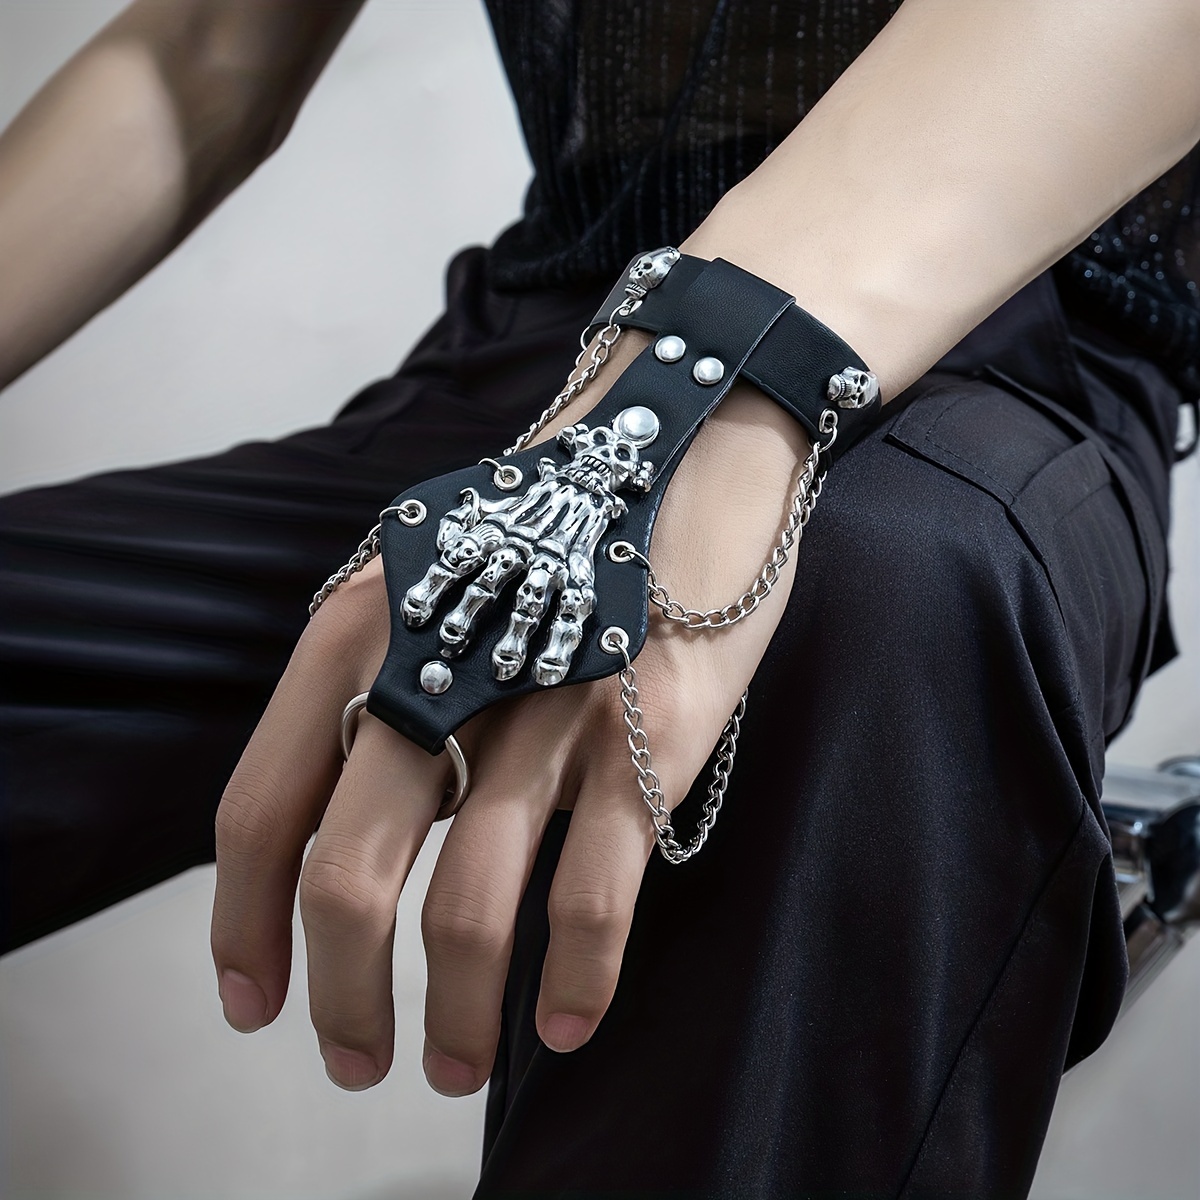 Goth & Punk Rock Jewelry for Men